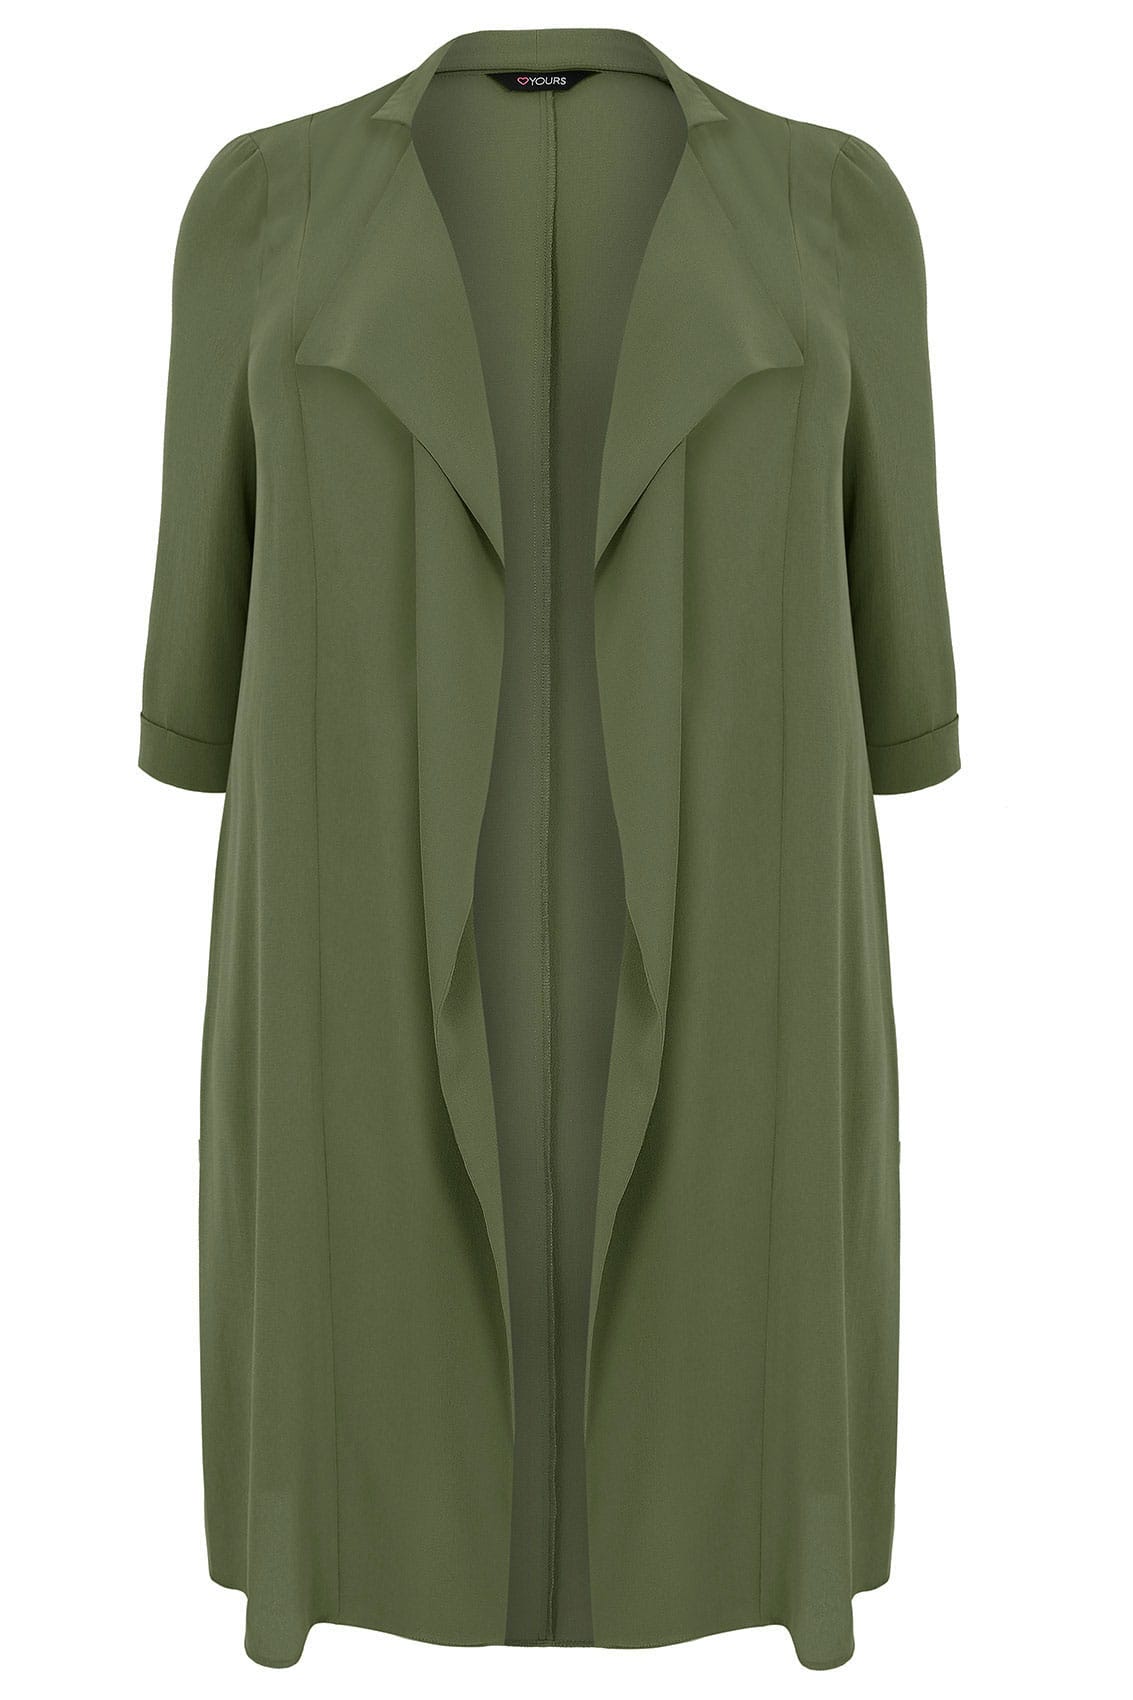 Khaki Panelled Duster Jacket With Waterfall Front & Half Sleeves Plus ...